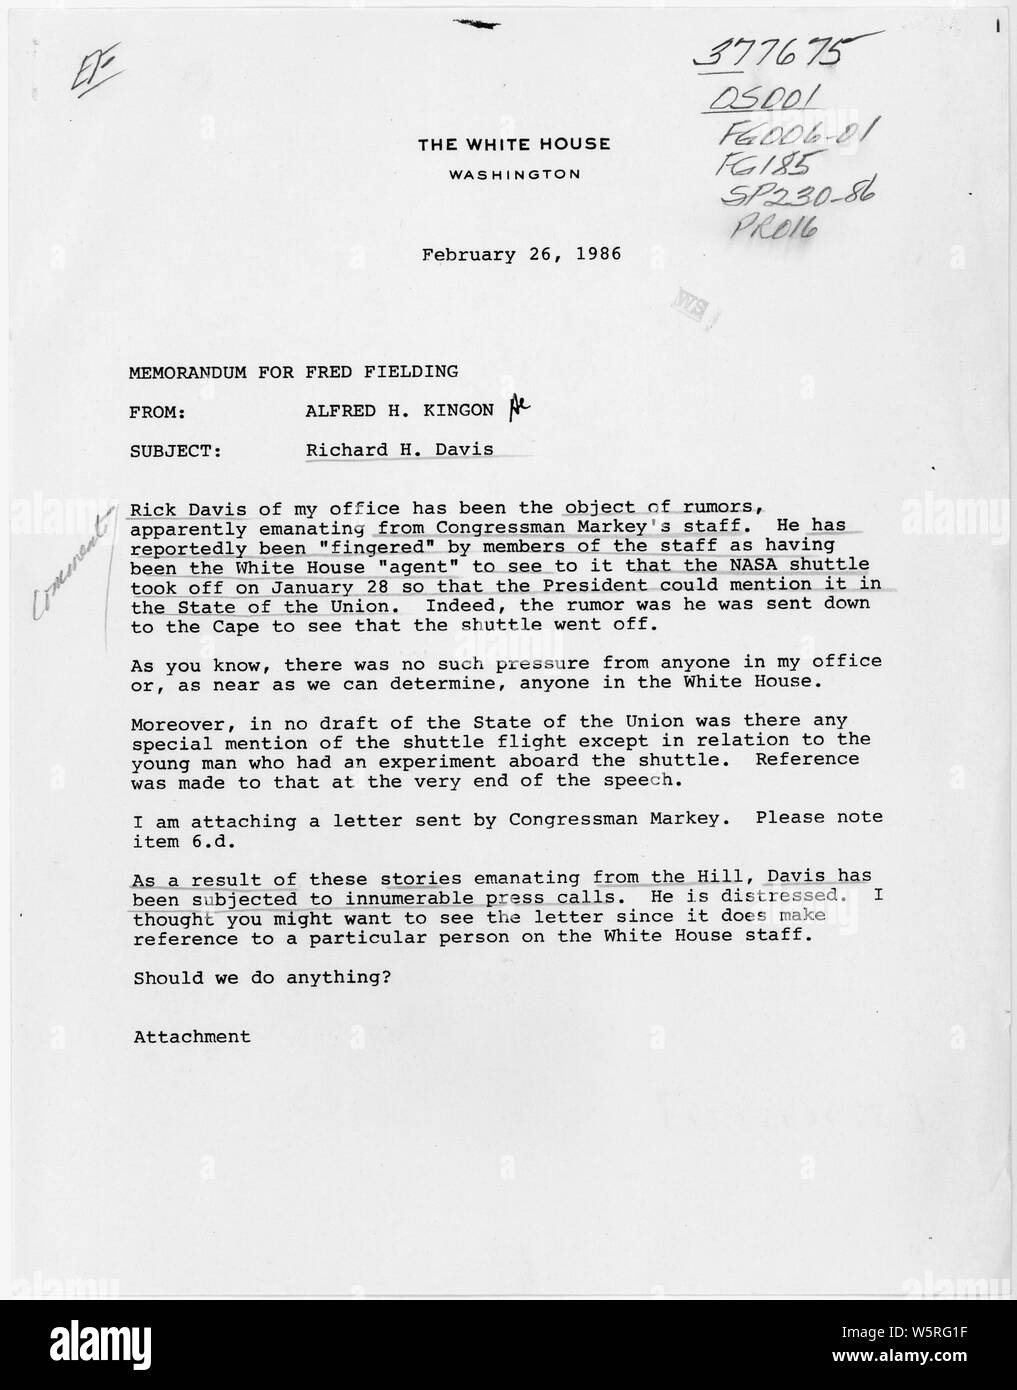 Memo from Alfred H. Kingon to Fred Fielding, re Richard H. Davis; Scope and content:  Memo from the Cabinet Secretary to the White House Counsel, regarding unfounded allegations that a White House staff person had a role in the timing of the space shuttle Challenger launch. Stock Photo